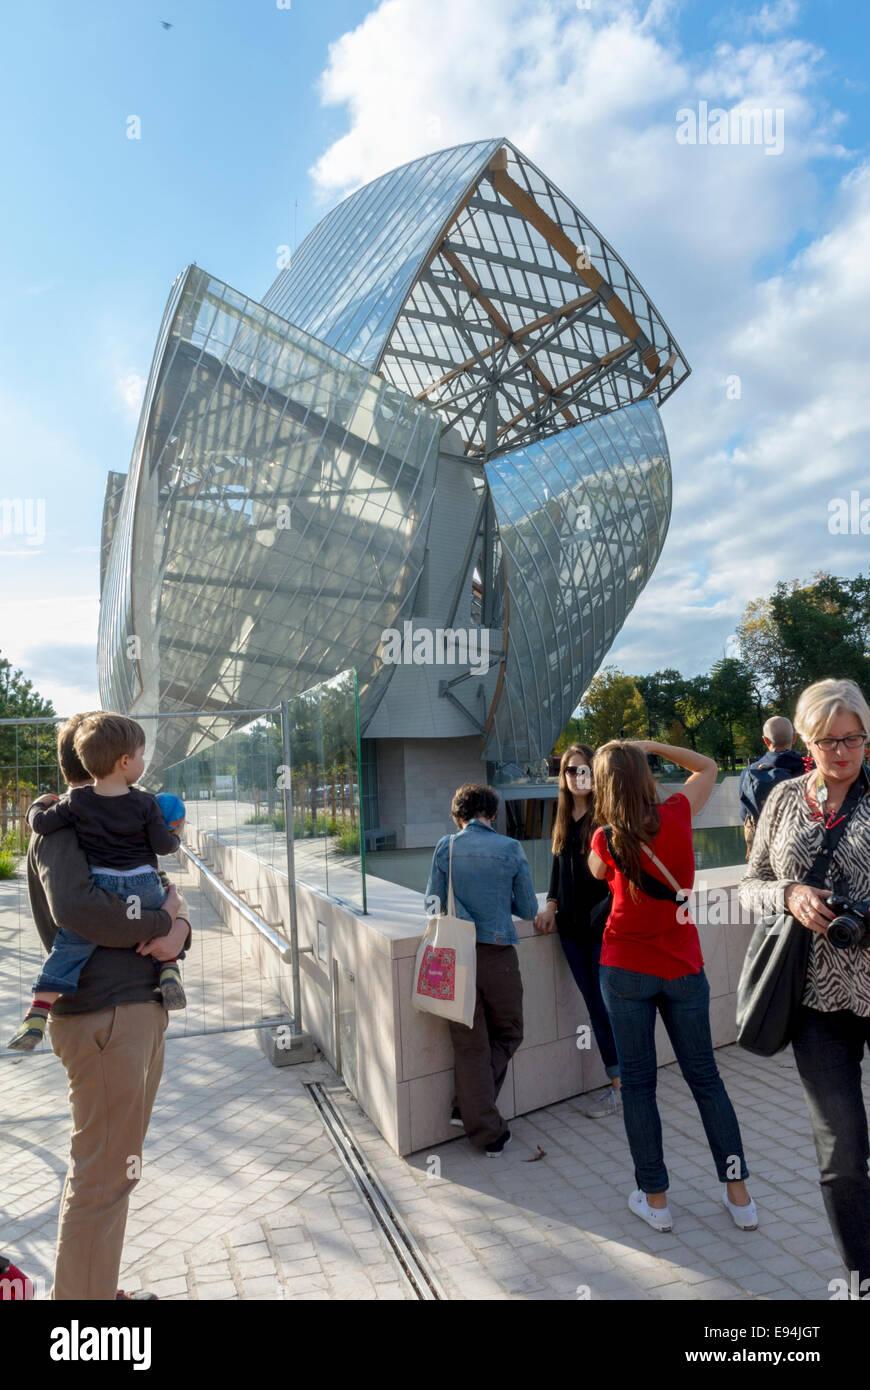 Paris, France. New Contemporary Arts Museum Building the "Fondation Louis  Vuitton", in Bois de Boulogne Park, Credit Architect: Fred Gehry, Crowd  Tourists Visiting Outside, discover unusual Stock Photo - Alamy